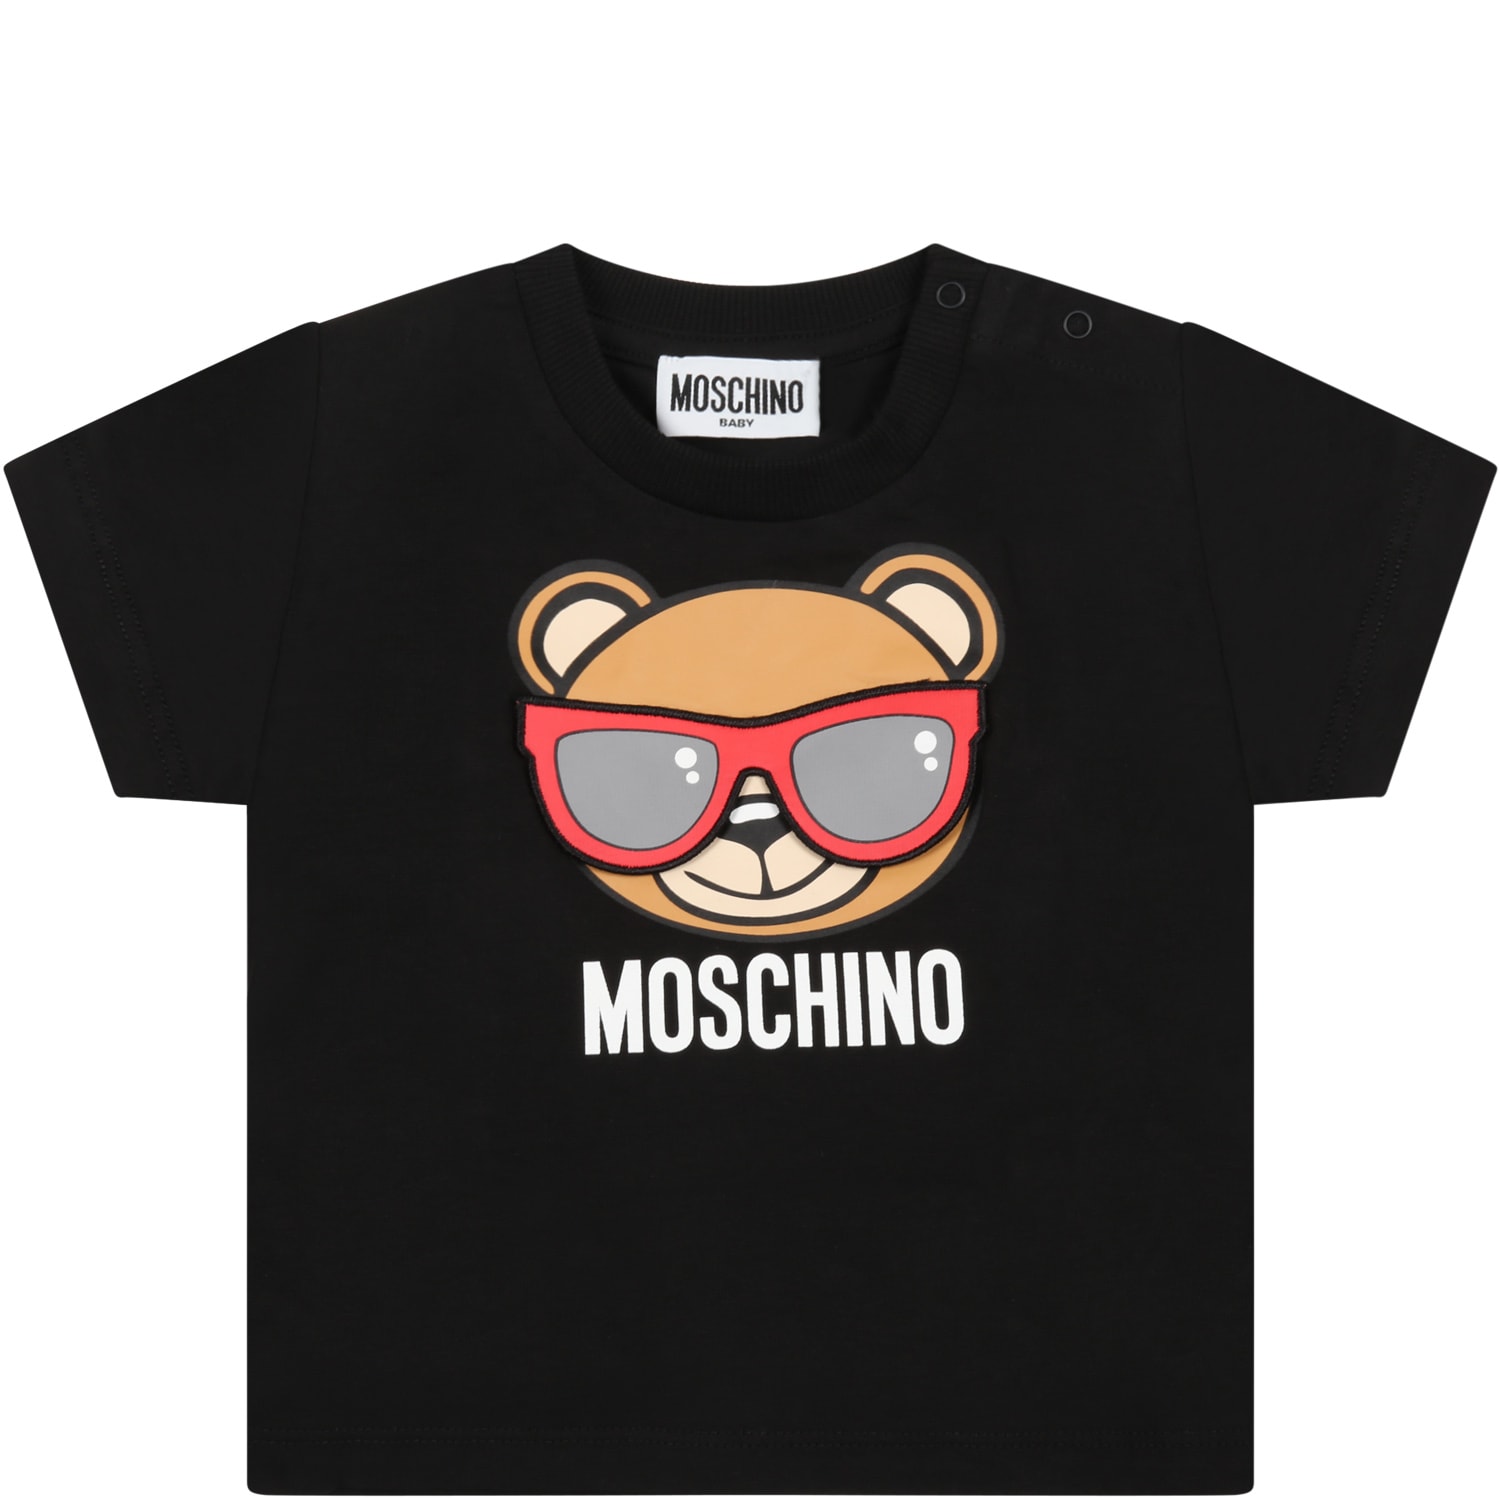 Moschino Black T-shirt For Baby Kids With Teddy Bear